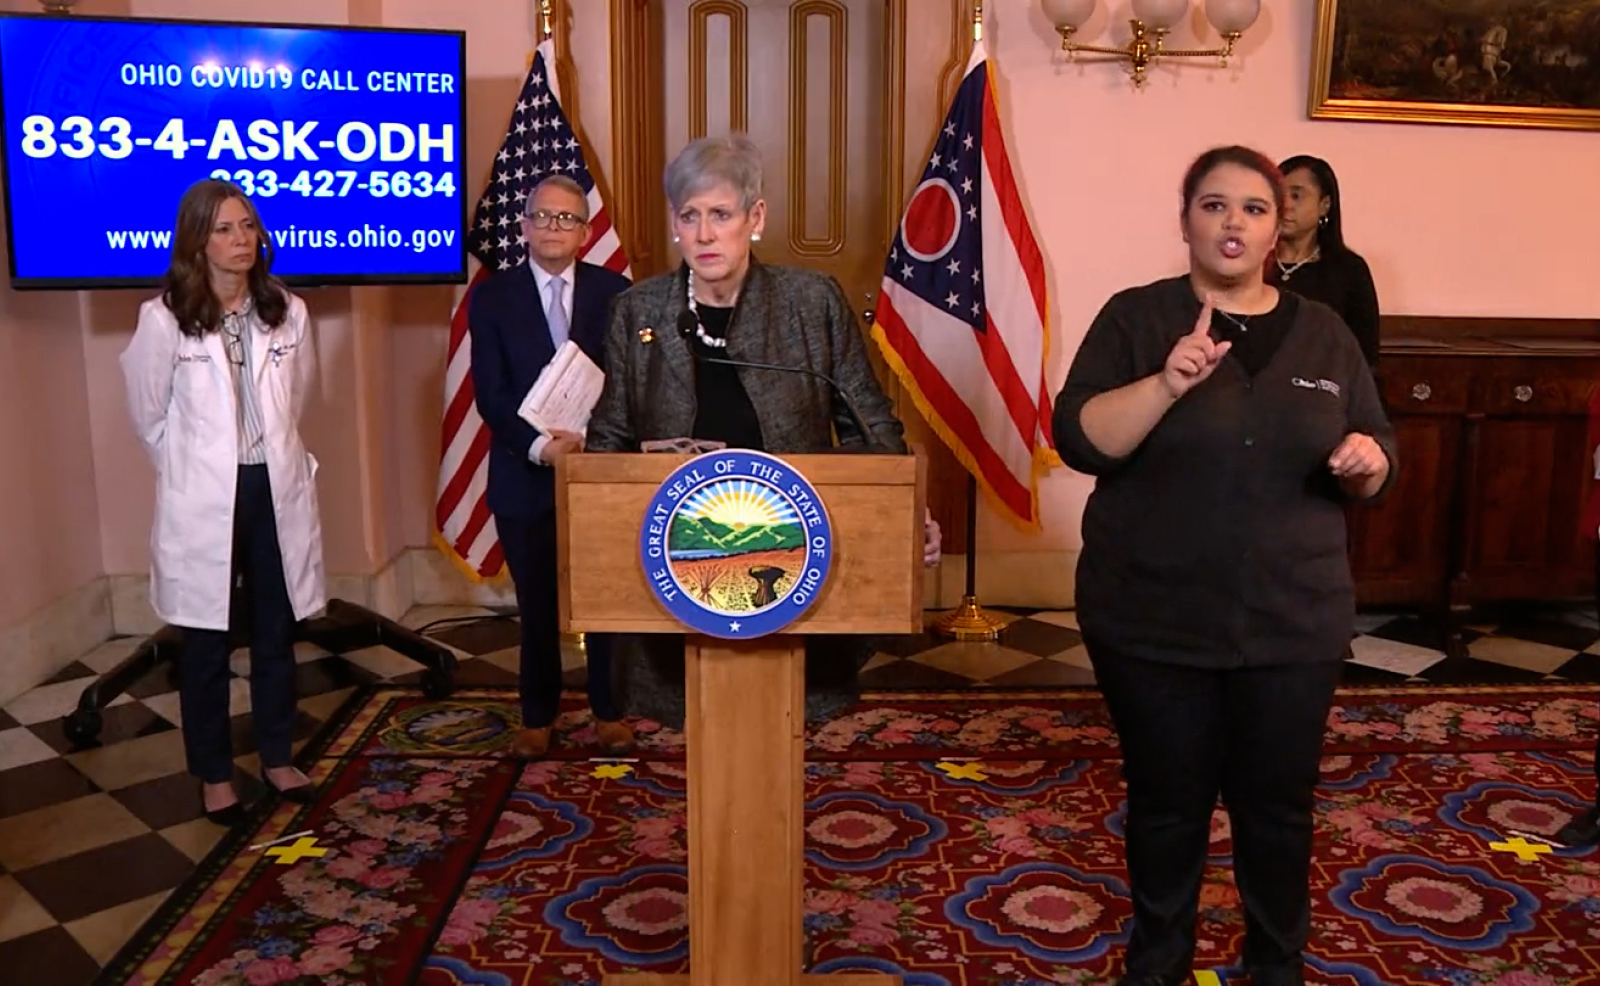 Image of a woman speaking from behind a podium. Beside her is a woman translating in American Sign Language. Behind her stand a woman wearing a white doctor's coat and a man wearing a suit